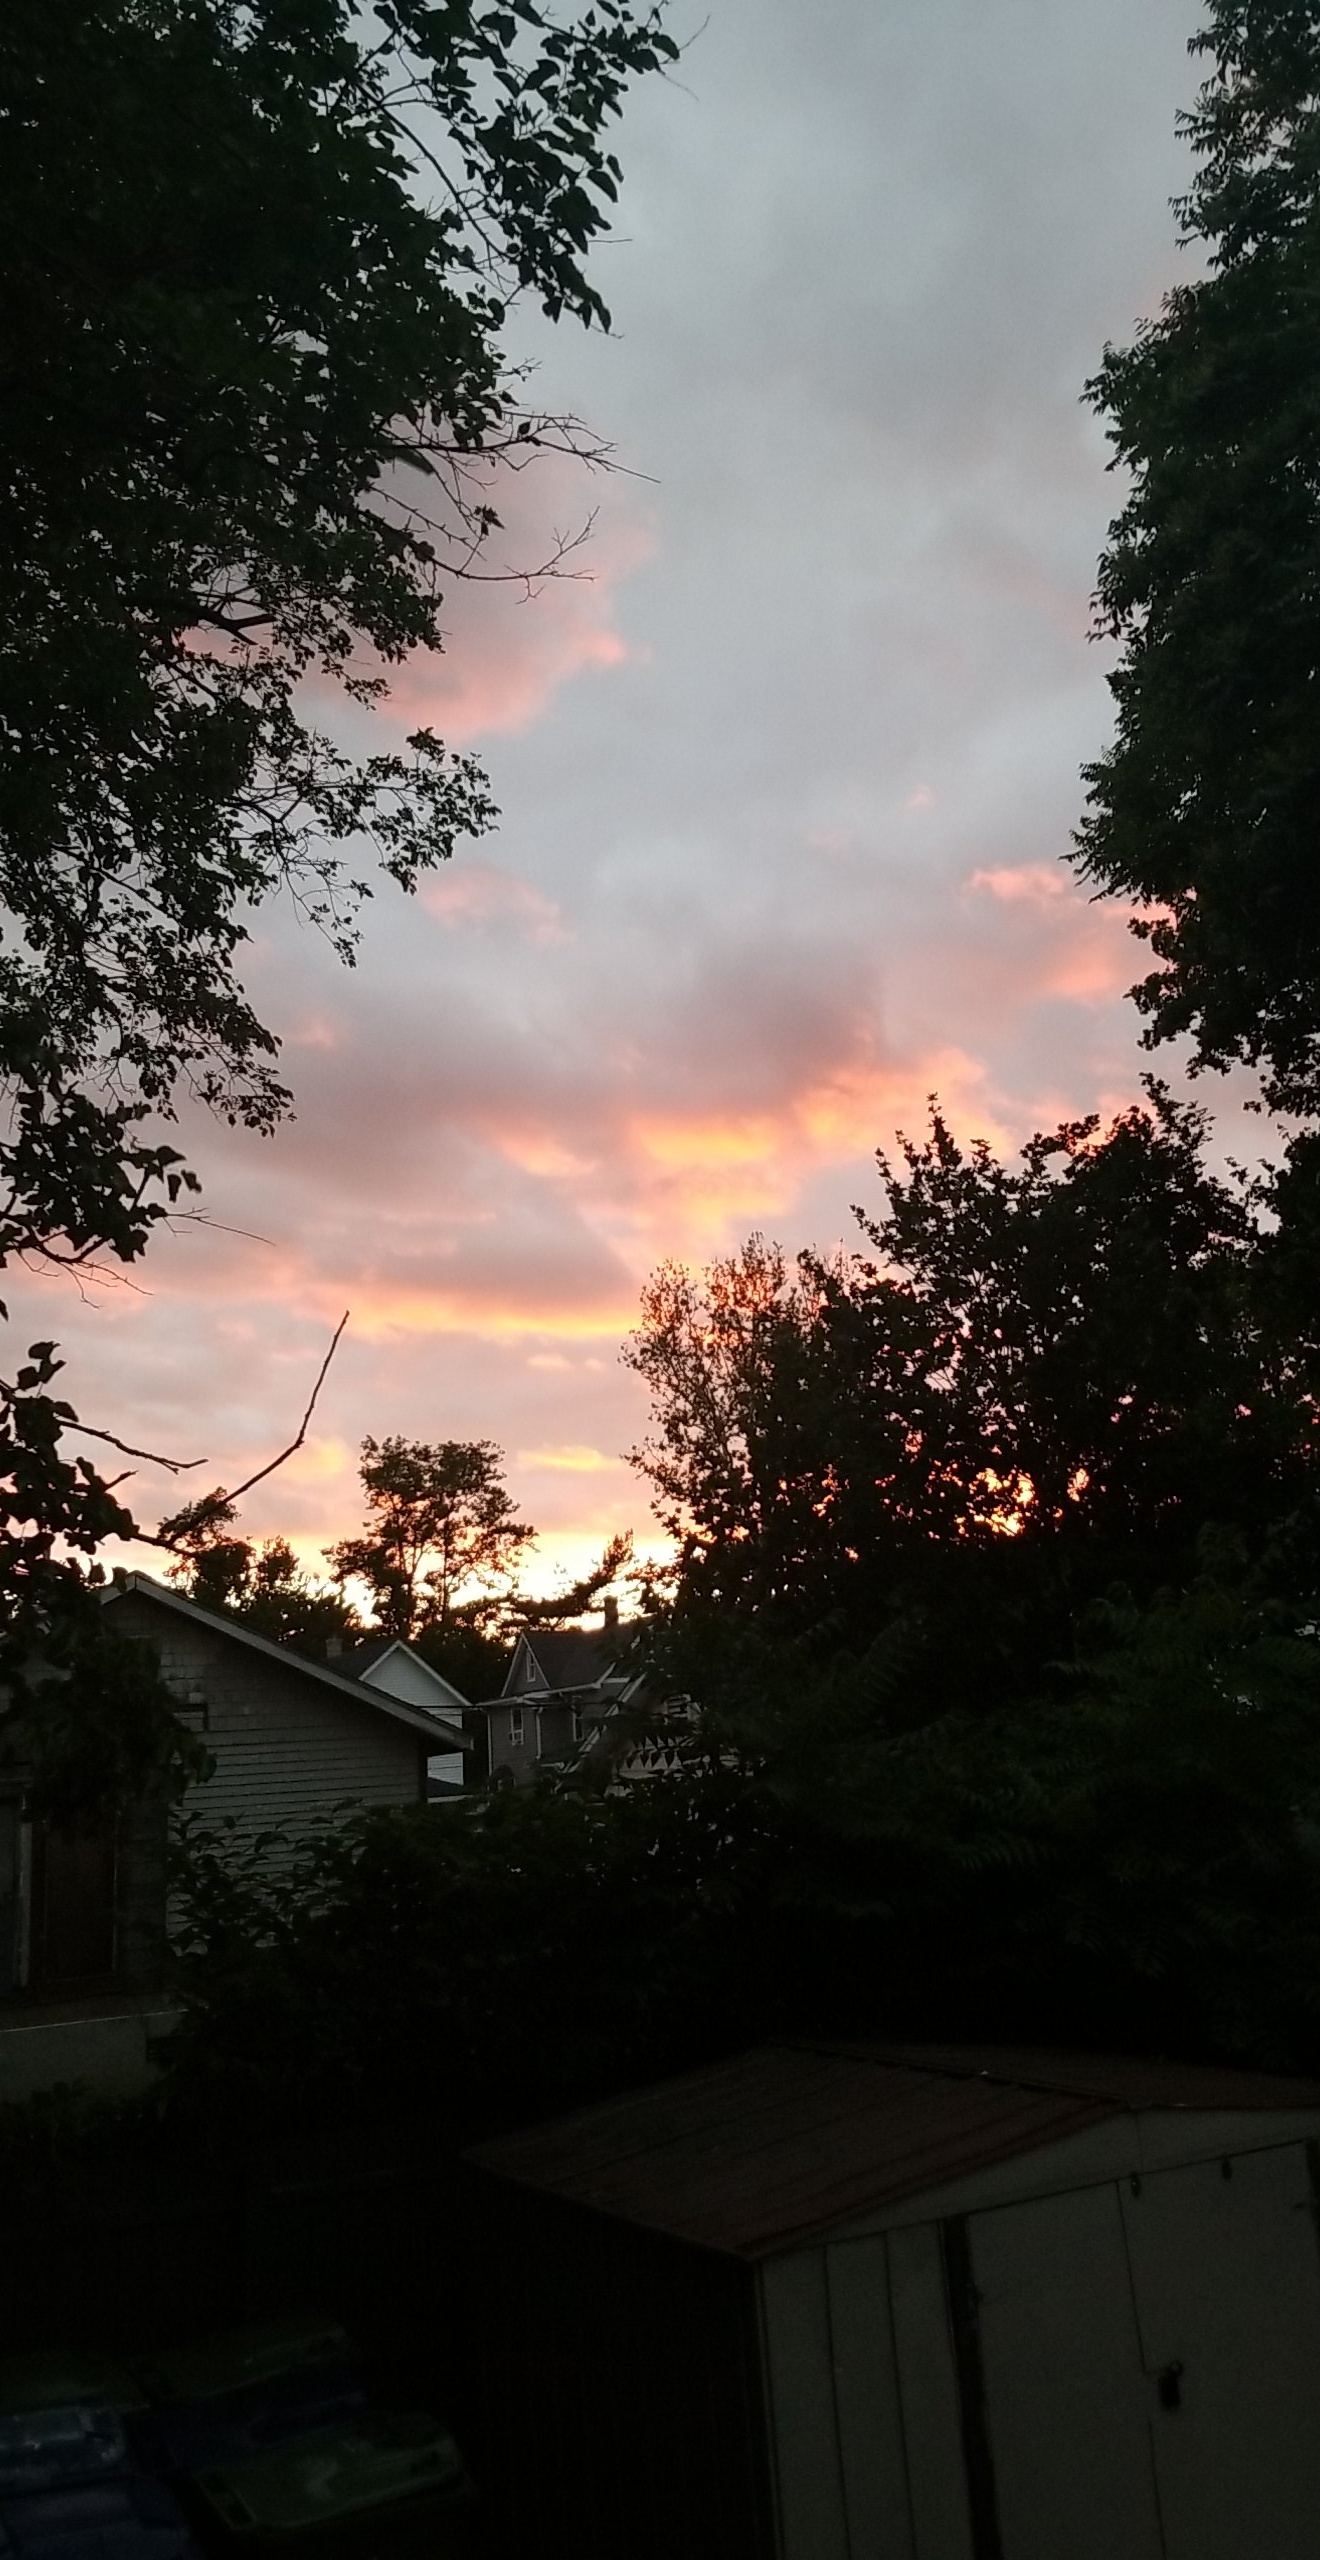 a photograph looking west from my room in neptune new jersey on saturday the 19th of june 2022. the image showsthe clouds lit by the sunset with the colors orange and gold framed by the silhouettes of trees on the left, right, and bottom of the image. one can spy three houses in the distance and this house's shed.